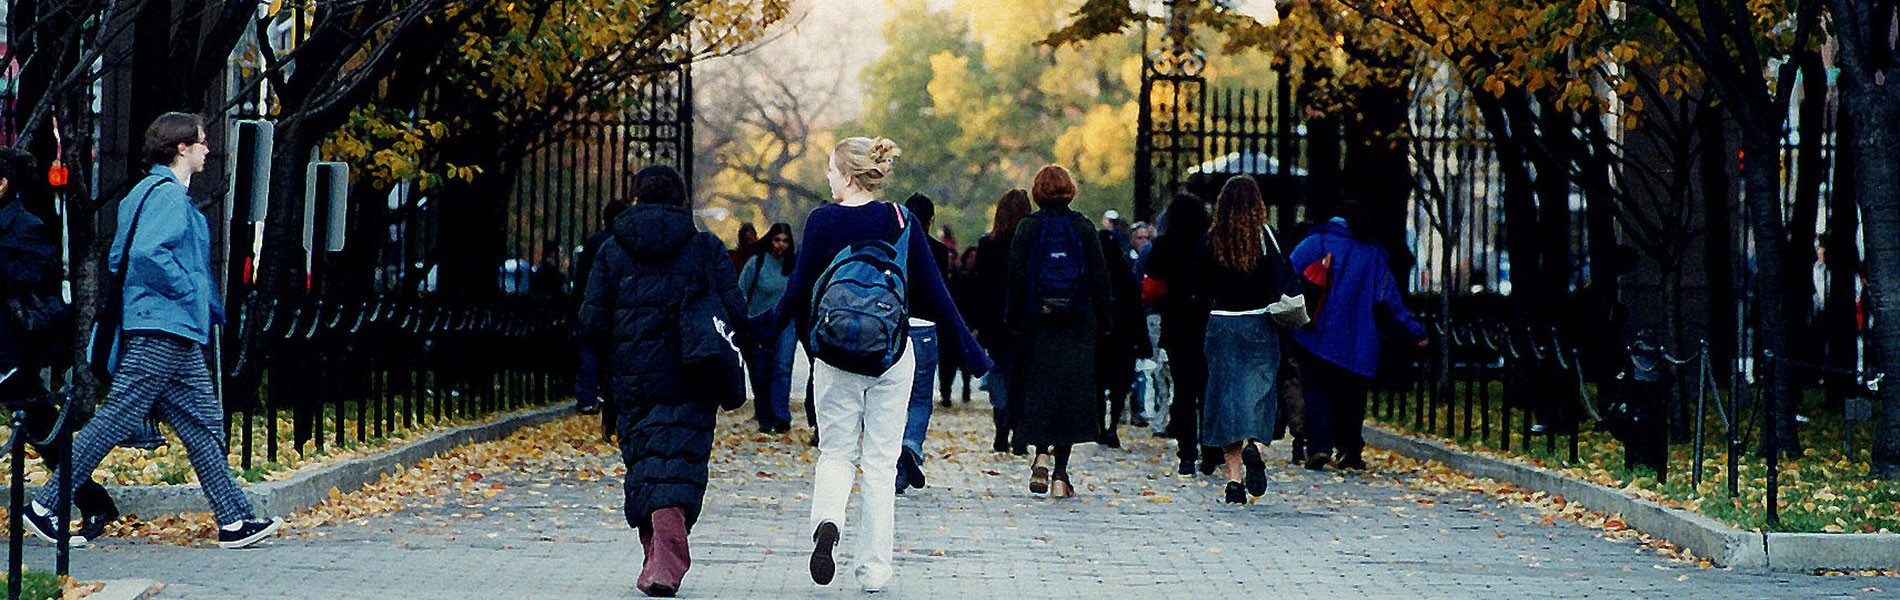 Students walk on campus along College Walk